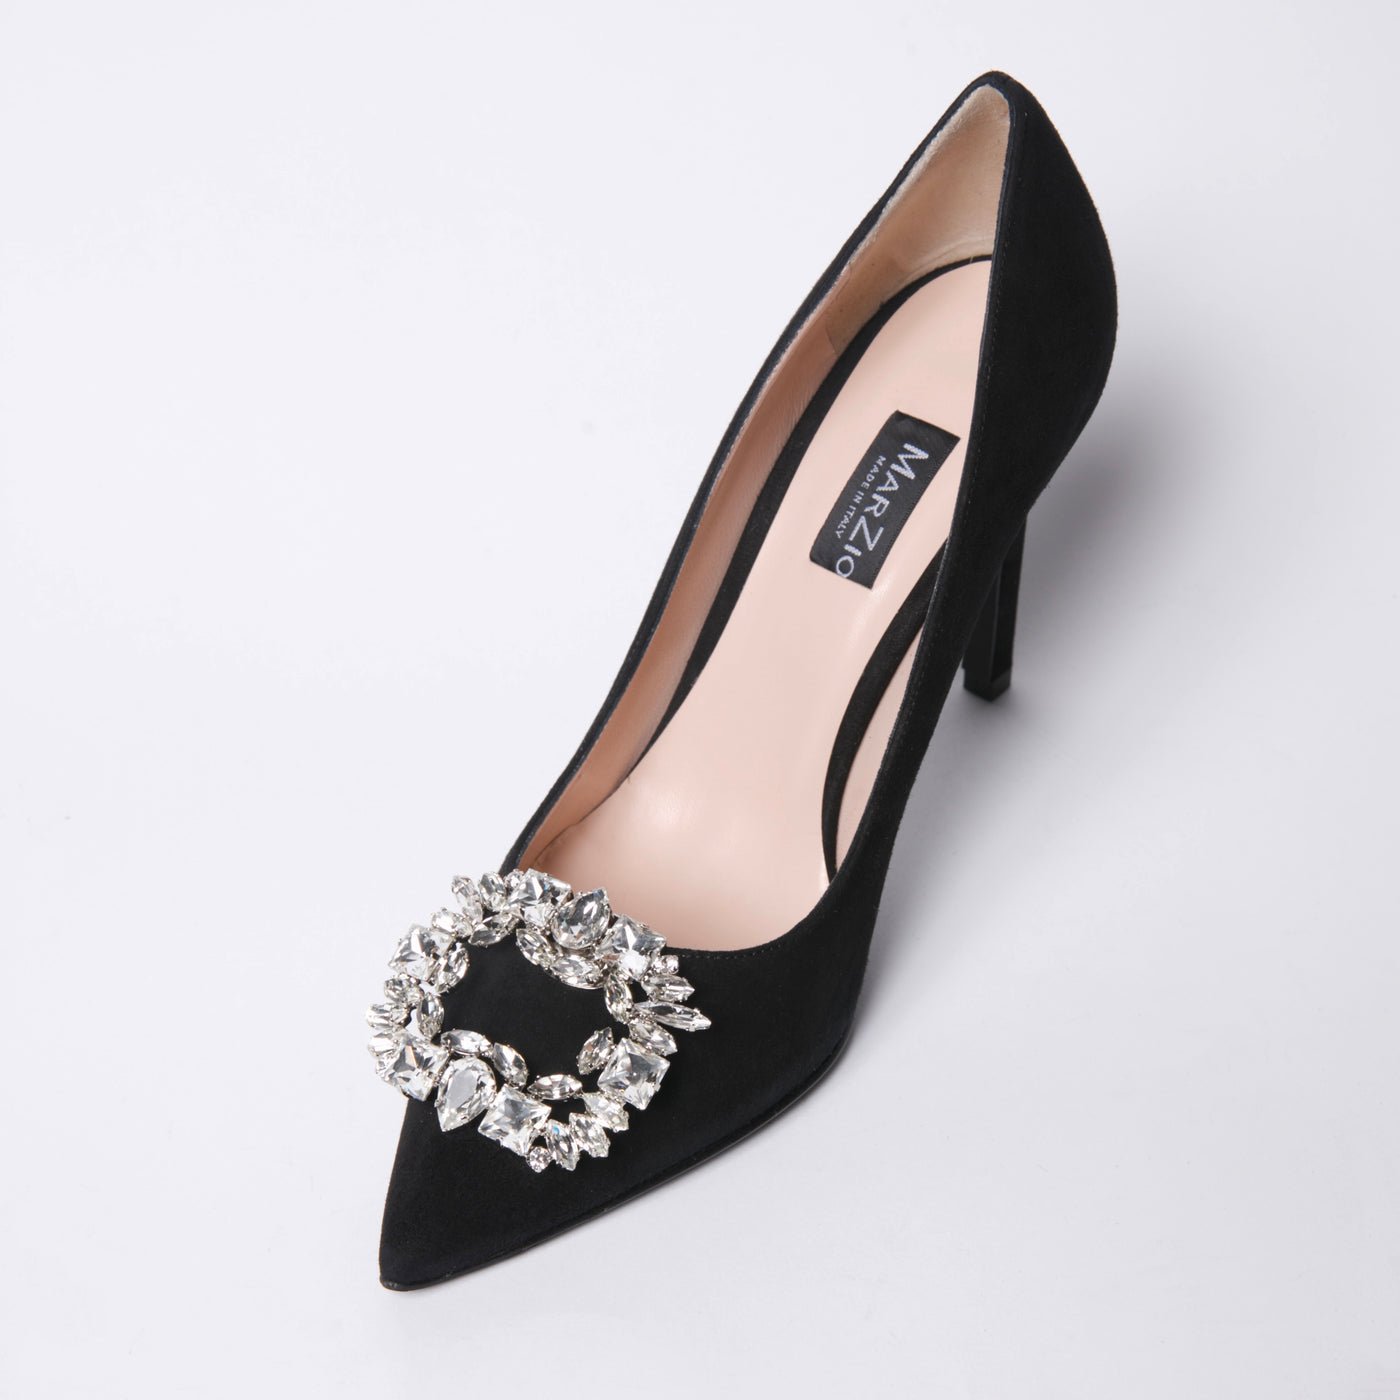 The Square Crystal SHOE CLIP